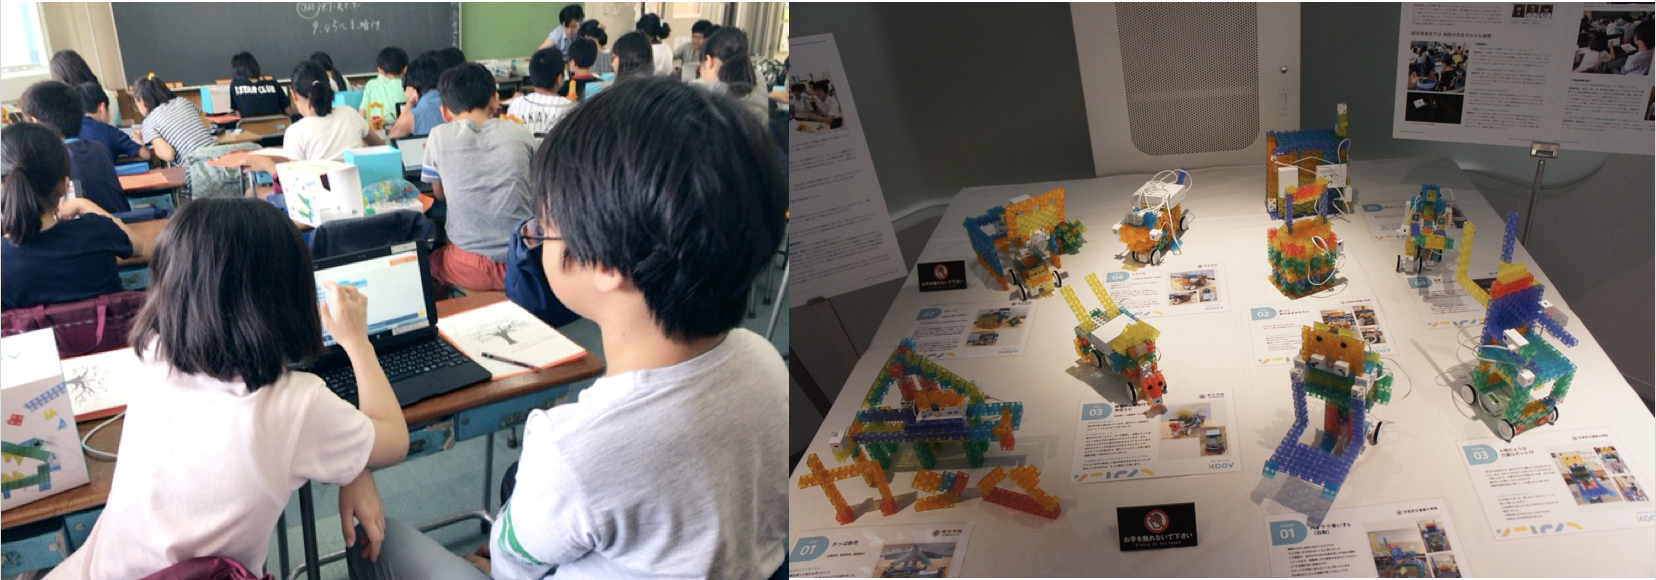 Cover Image for Scratch Day ＠埼玉大学 開催のお知らせ